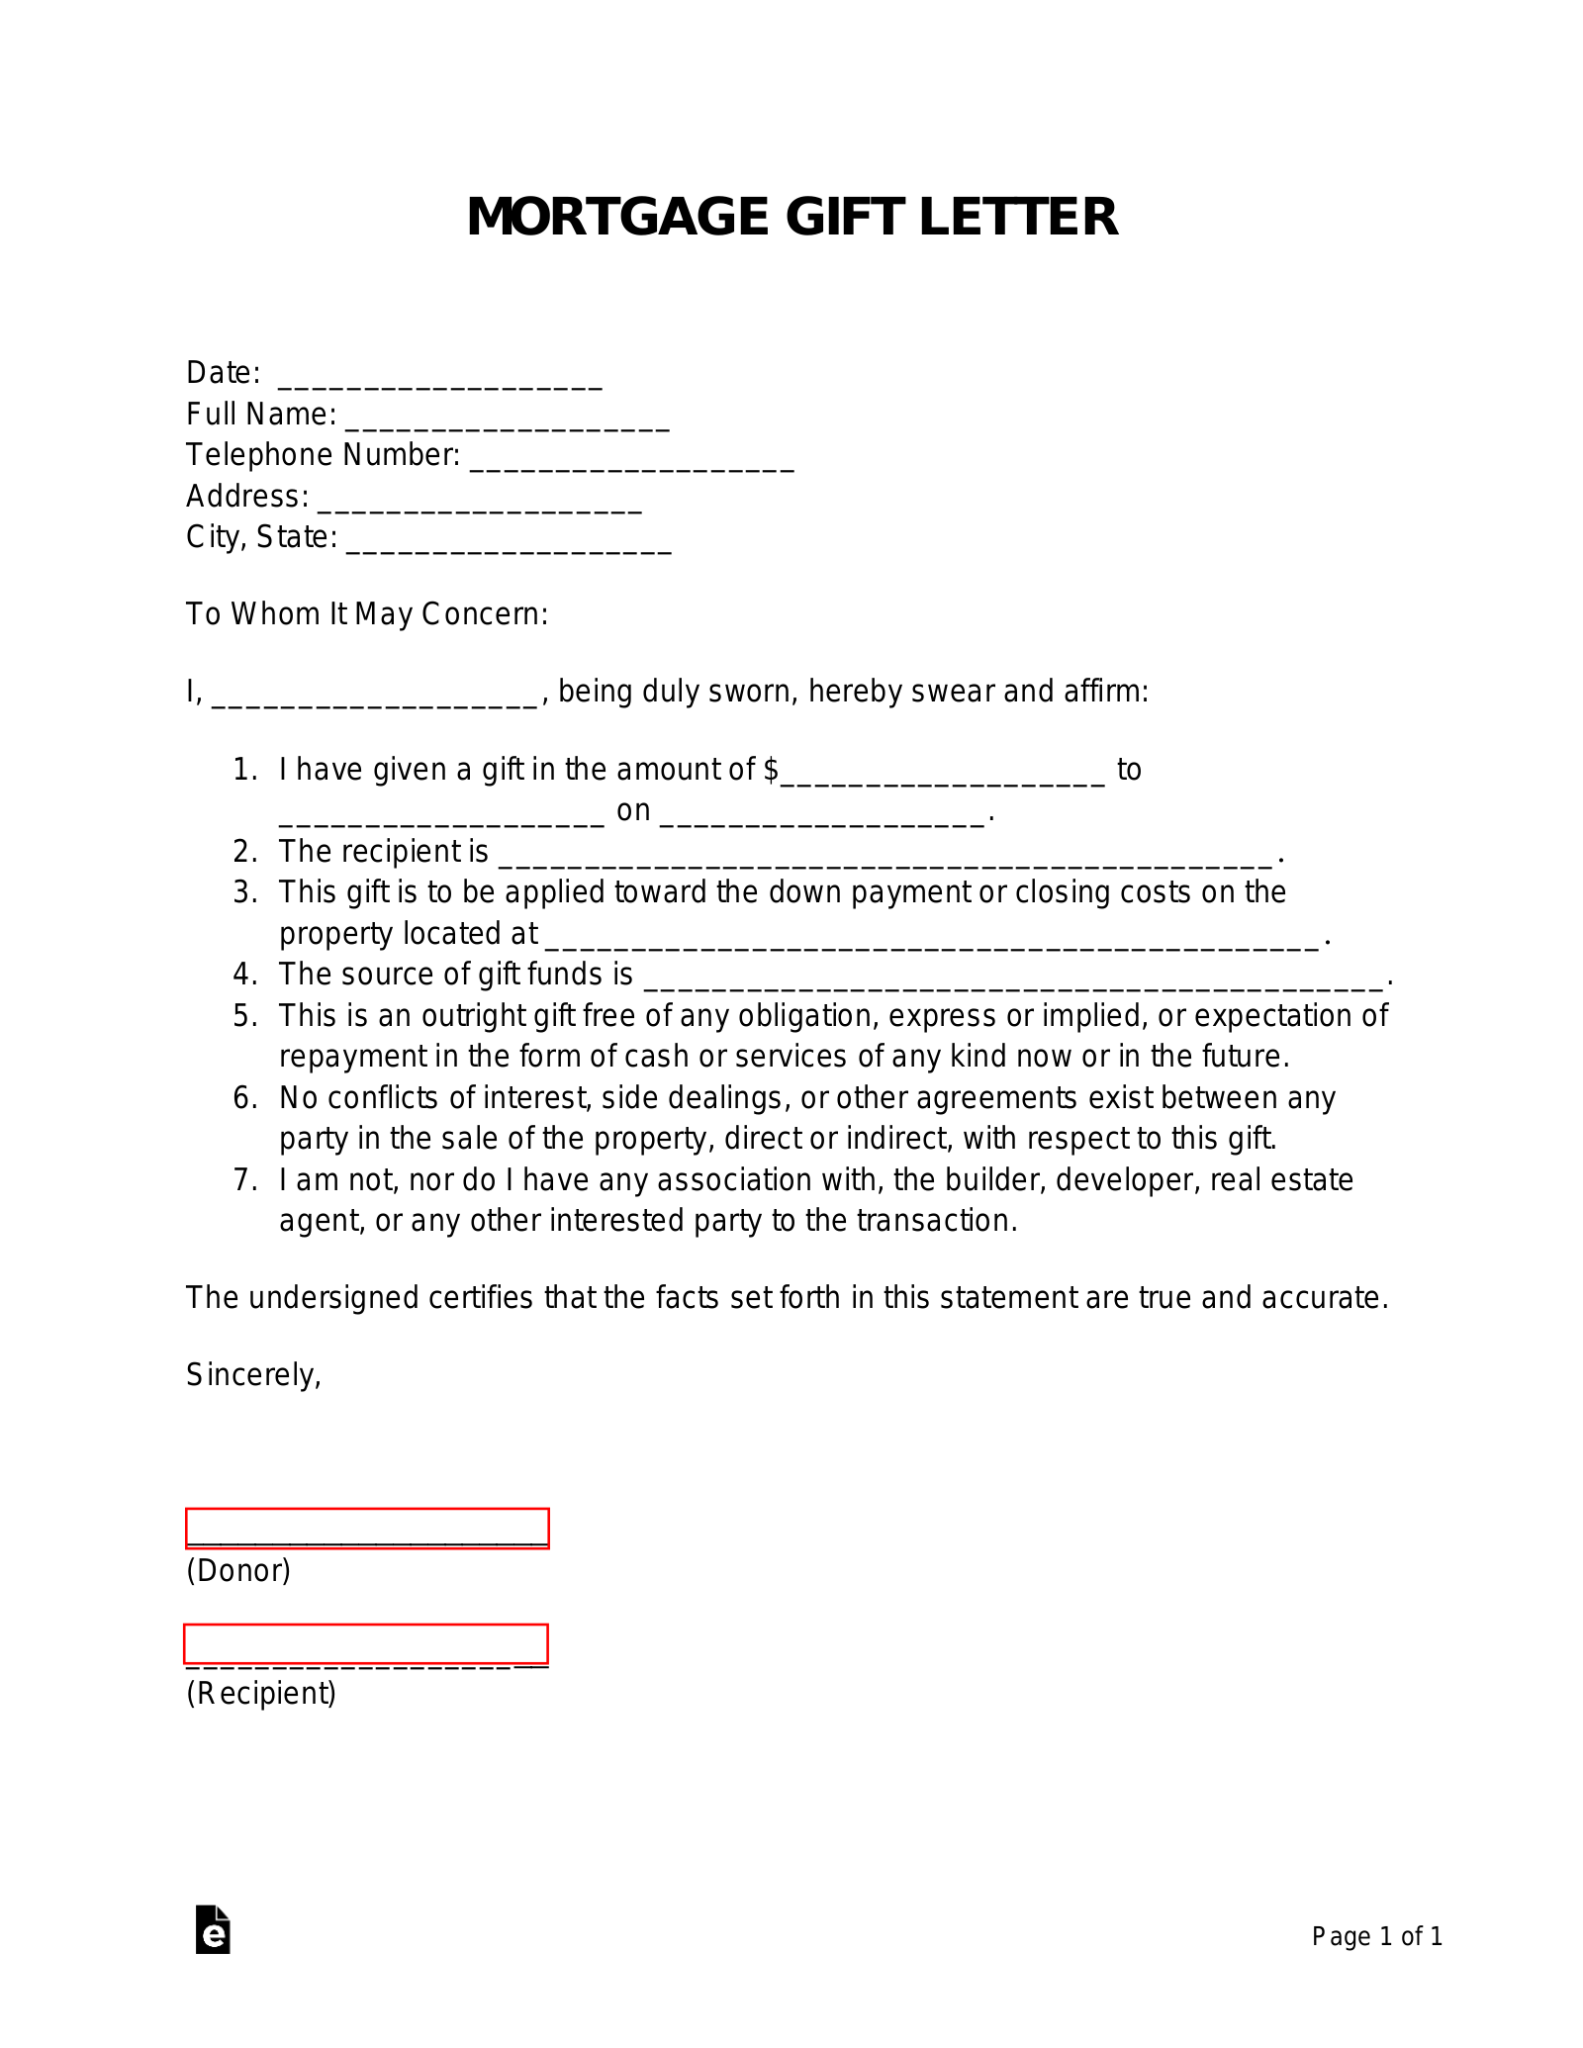 Gift Letter Template For Mortgage